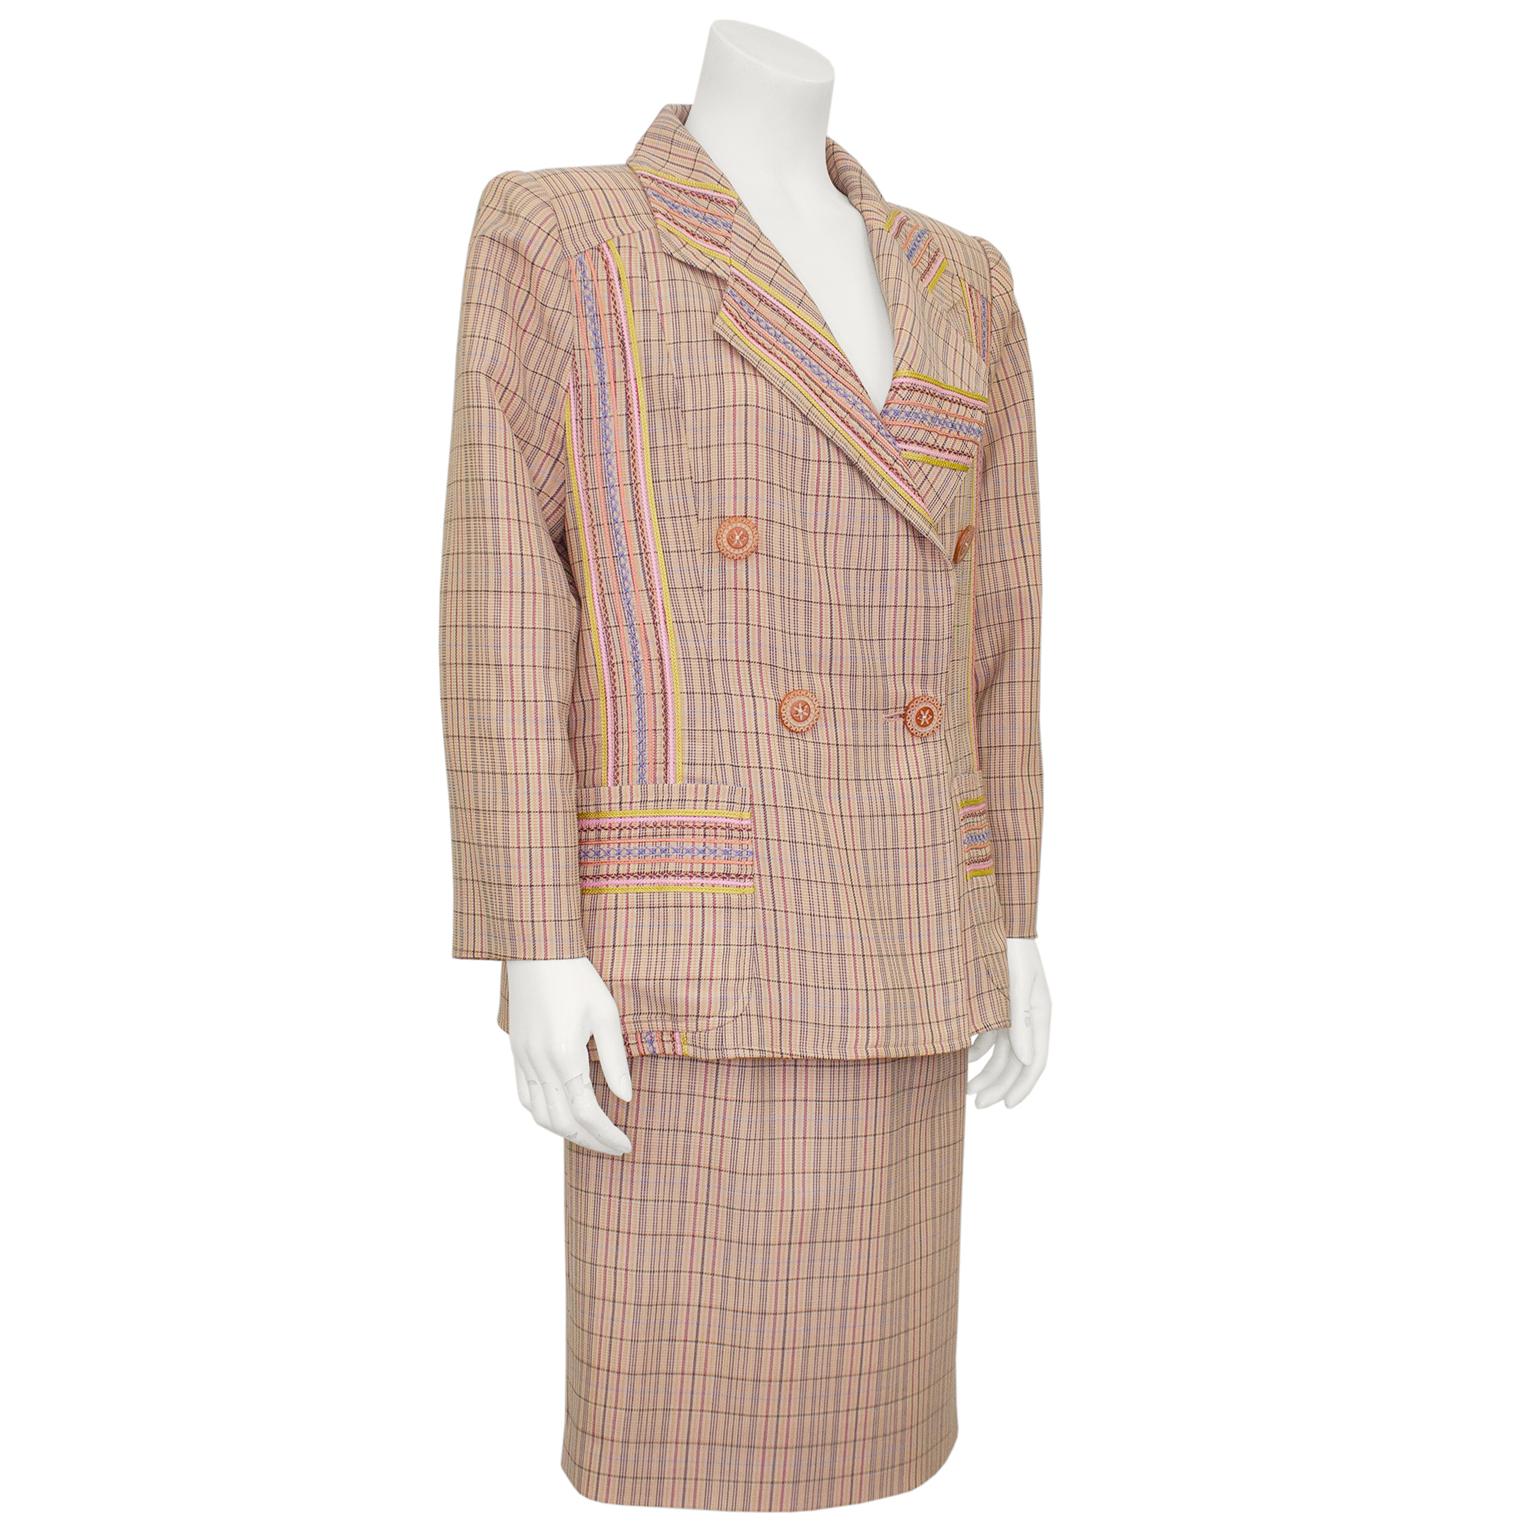 1990s Christian Lacroix peach striped skirt suit with cross stitch embellishments on the lapels, front and pockets as well as across the back of the shoulders. The peach striped fabric is accented with gold, periwinkle, pink and plum trimmings which